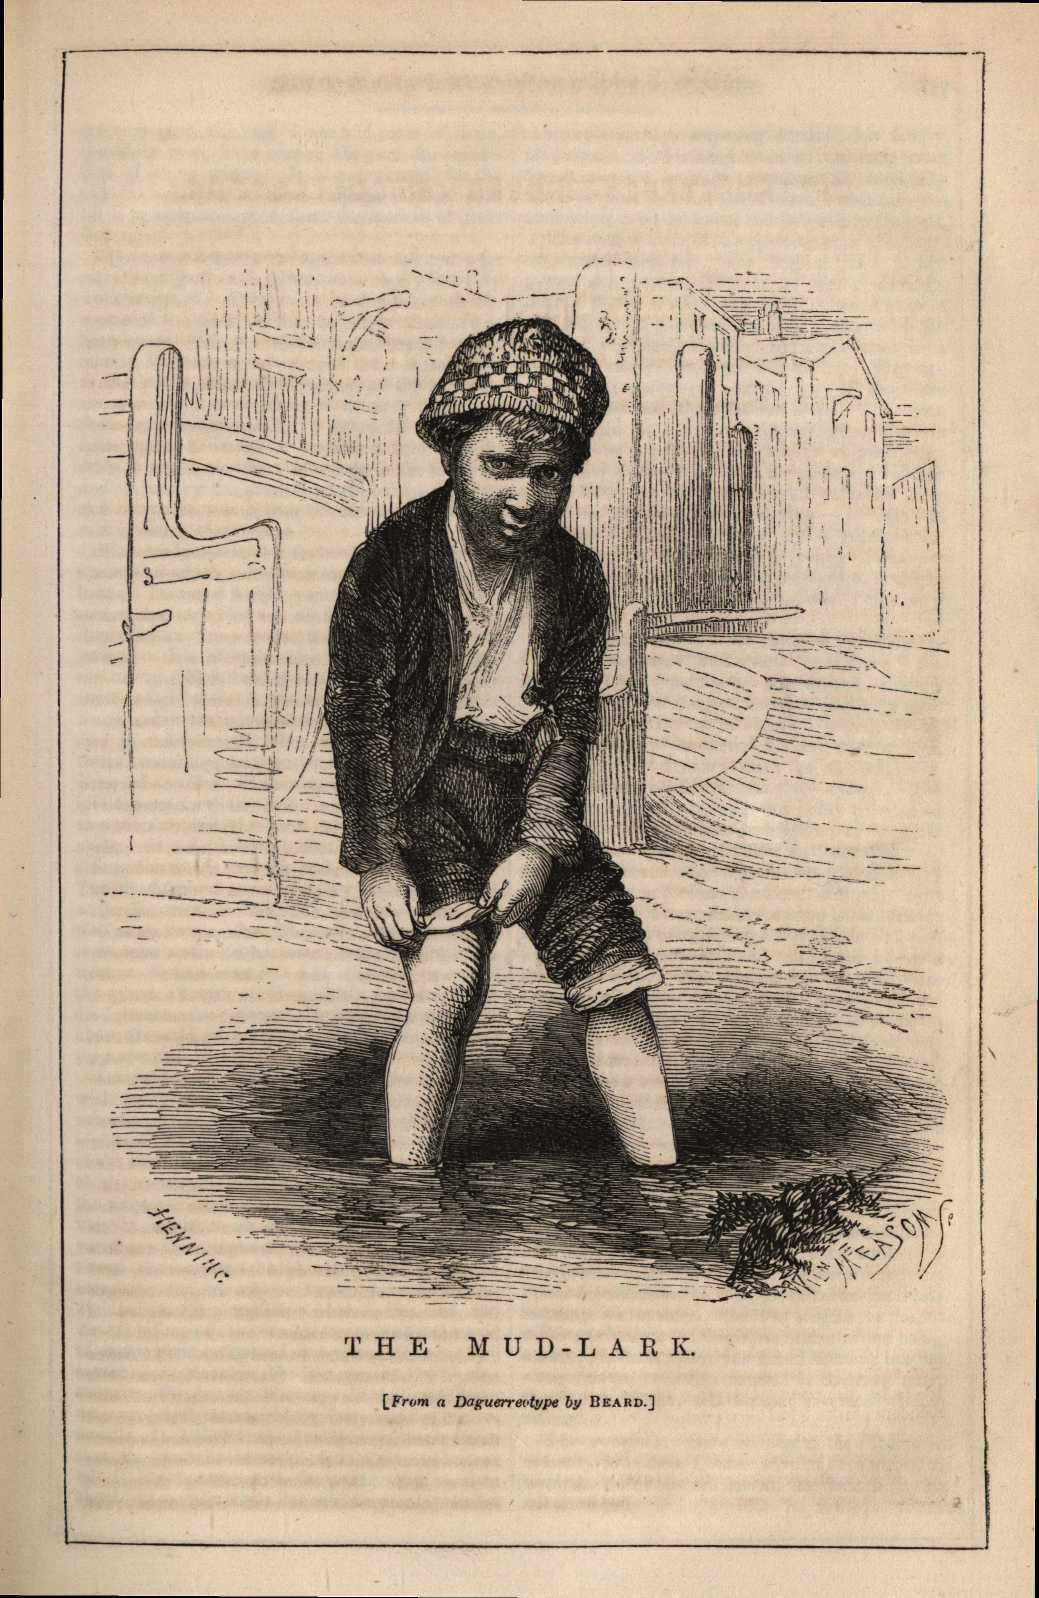 ‘The Mud-lark’ from Henry Mayhew’s London Labour and the London Poor